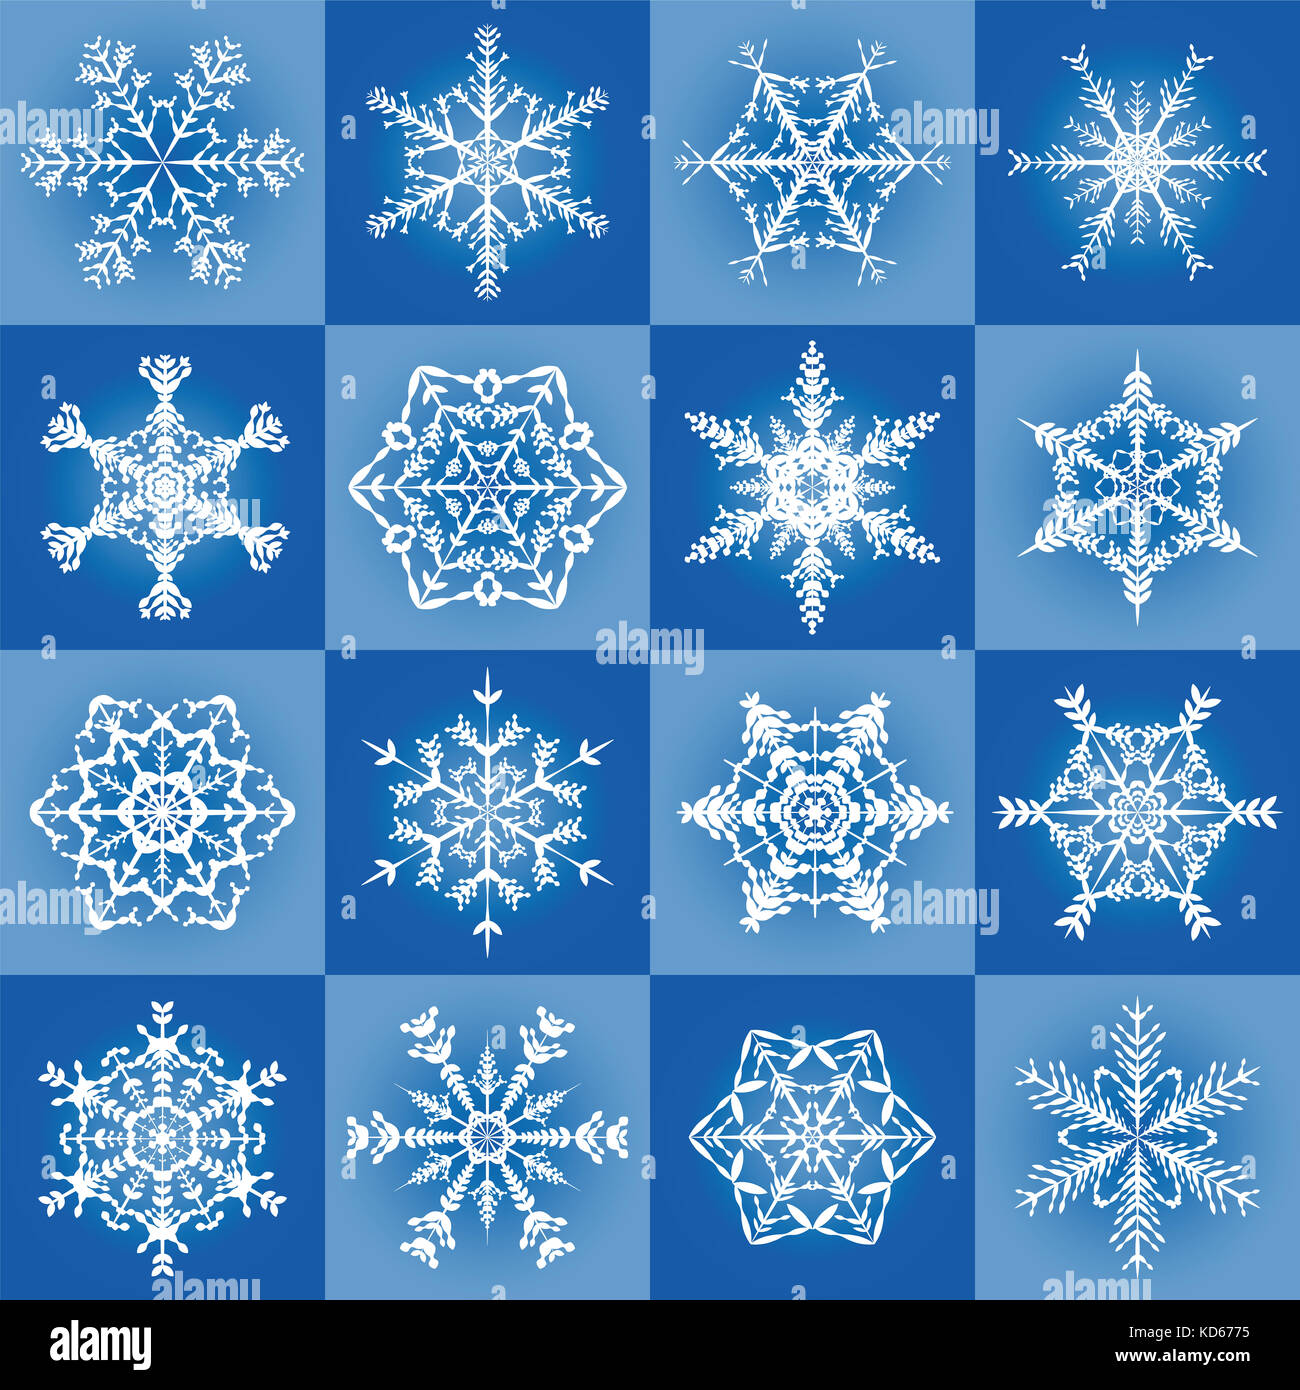 Snowflakes - filigree blue christmas pattern background with sixteen different tiles - seamless extendable illustration. Stock Photo